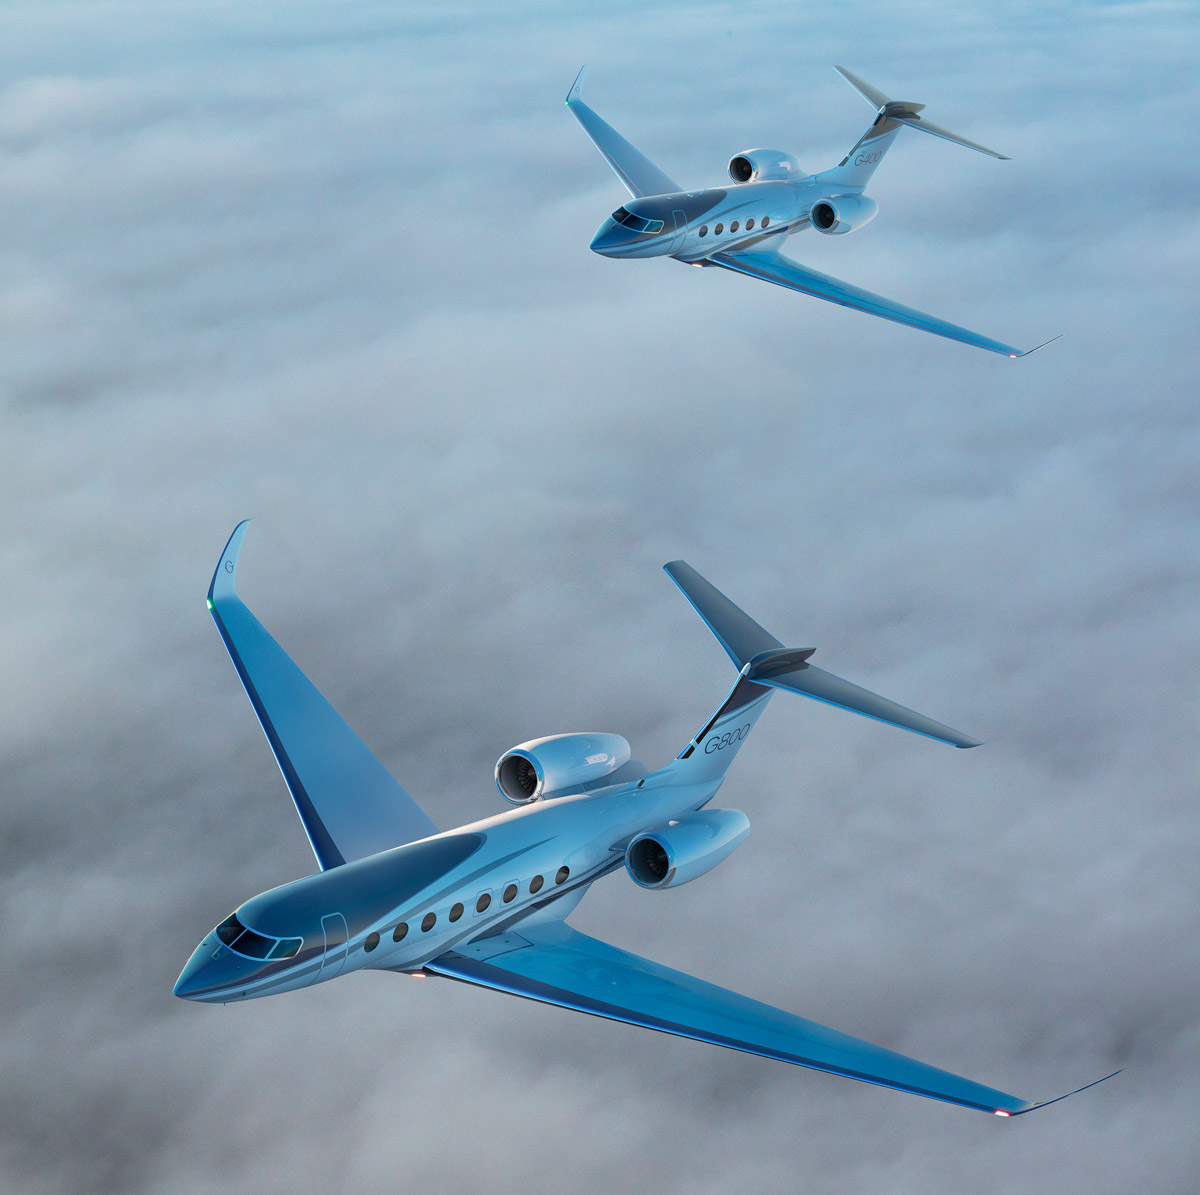 Gulfstream introduces two all-new business jets